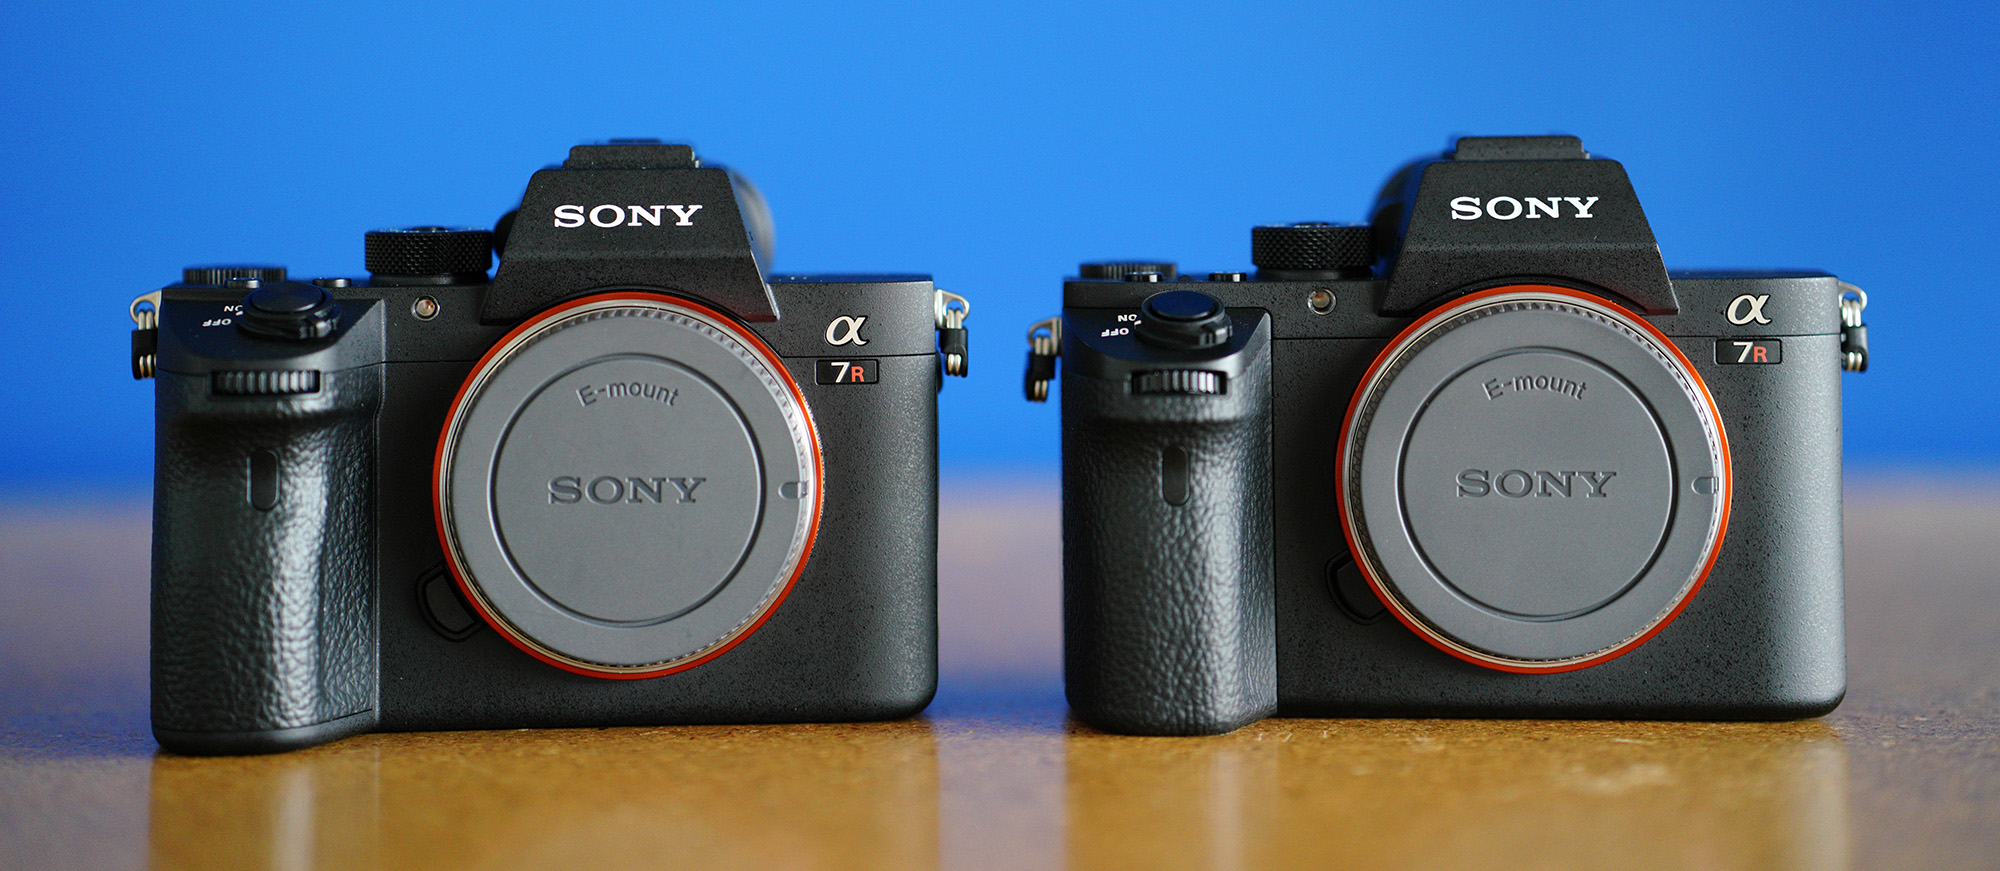 Sony A7R III Review